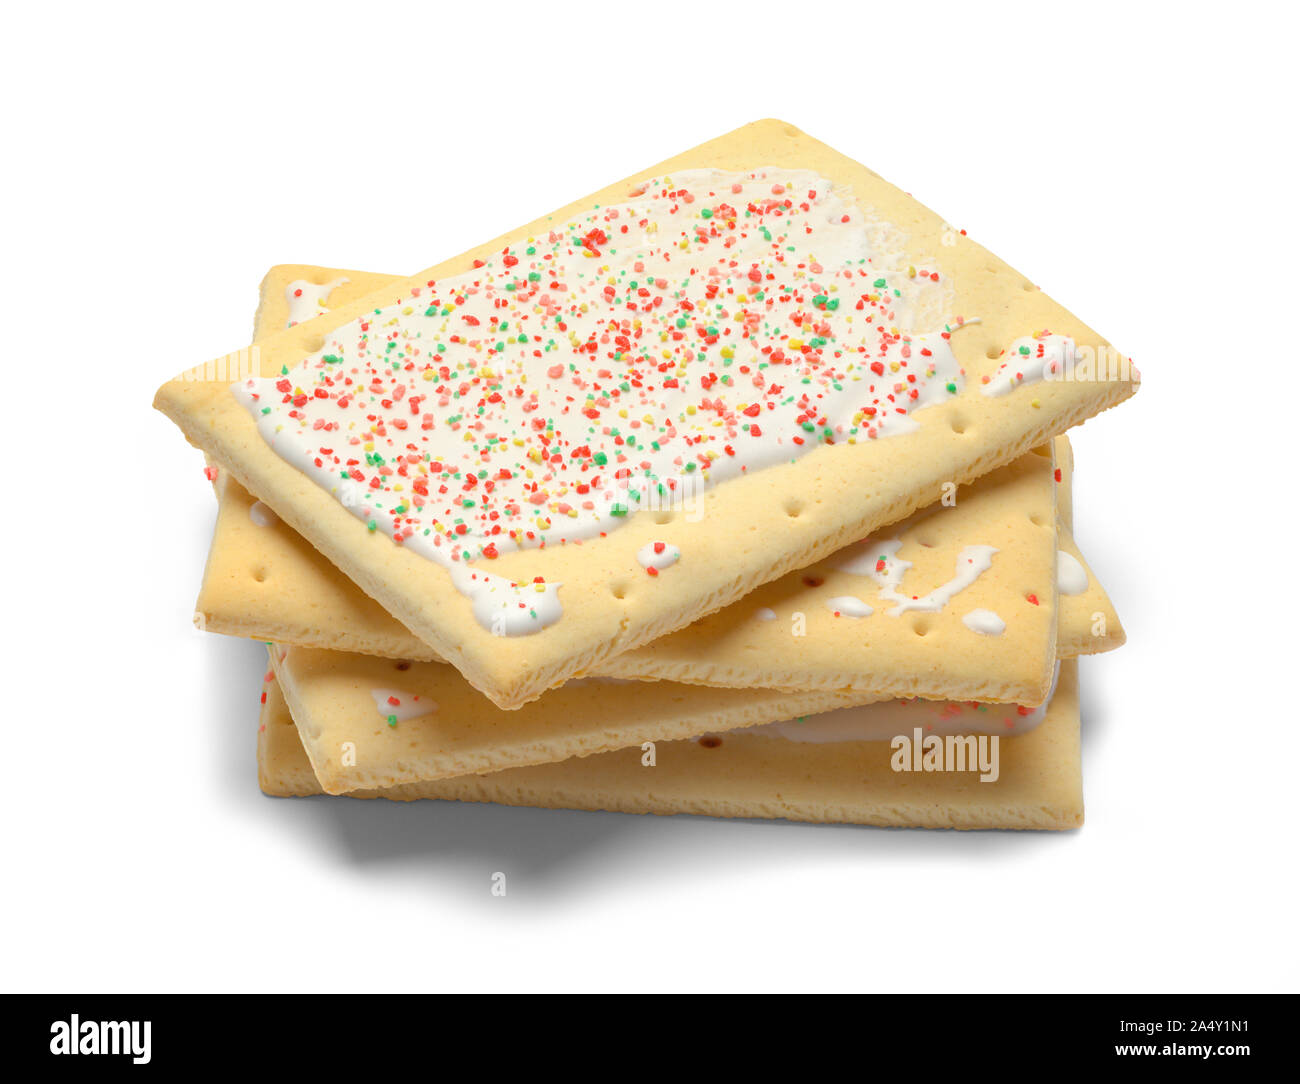 Stack of Toaster Pastries Isolated on White Background. Stock Photo